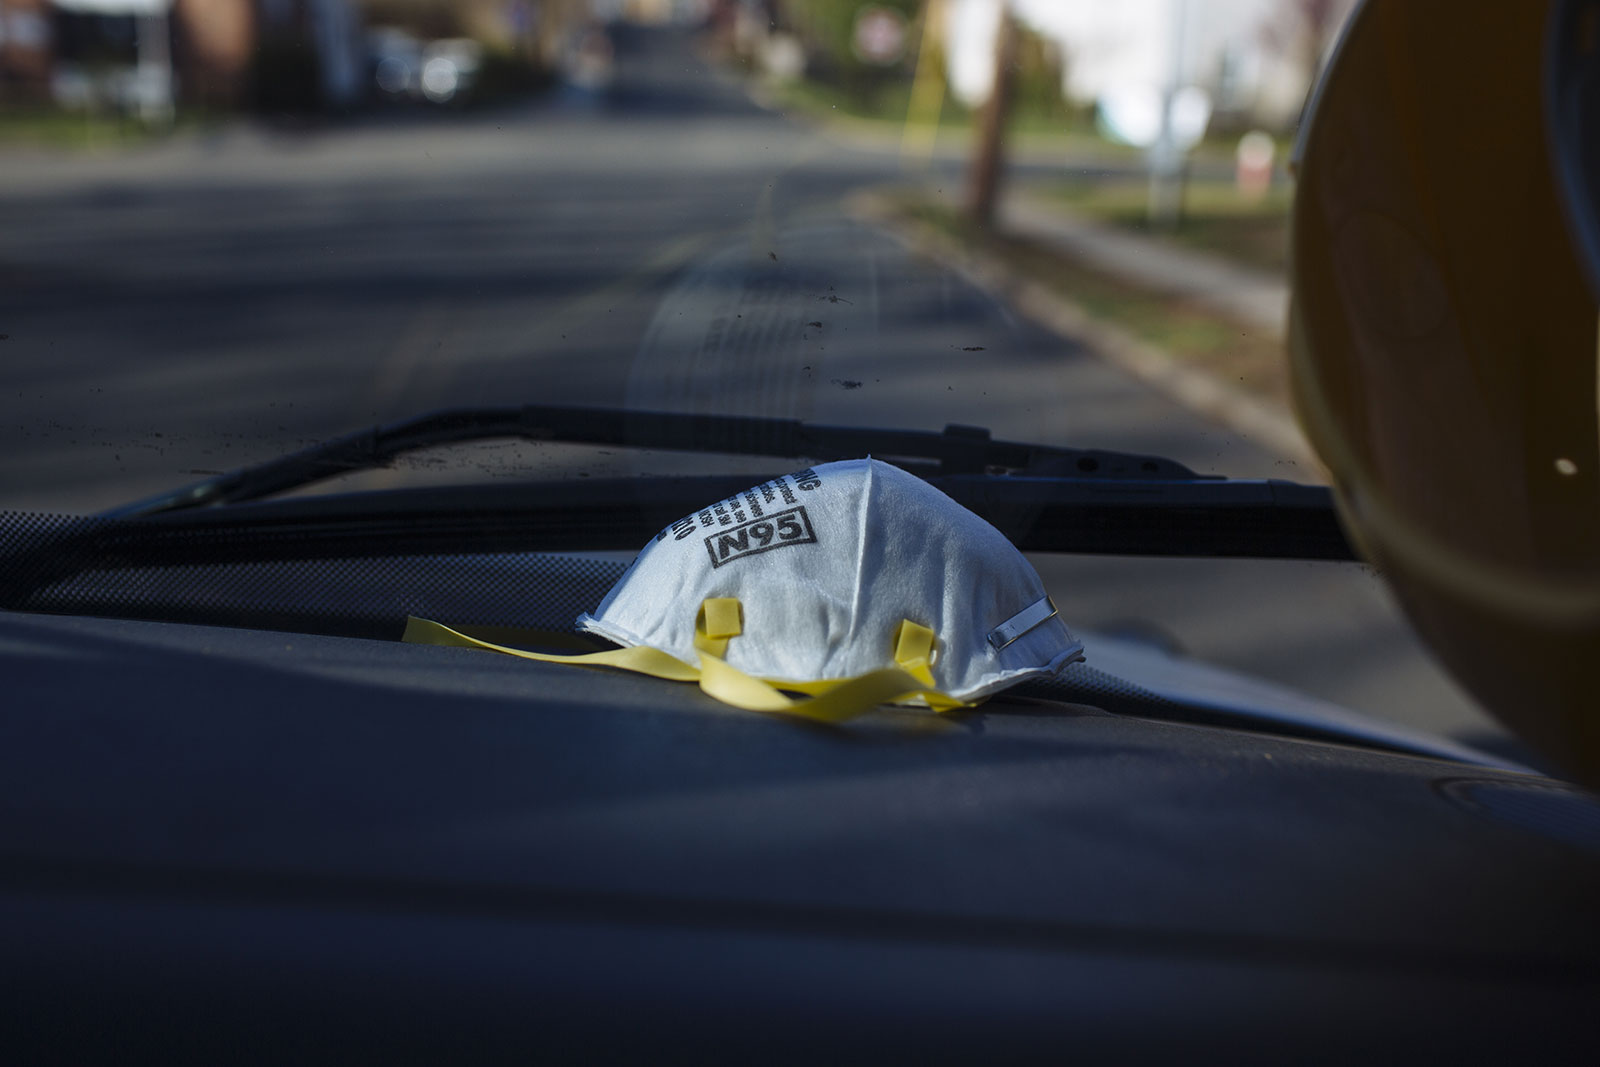 An N95 protective mask sits on the dashboard of an ambulance in Teaneck, New Jersey, on Saturday, April 11.